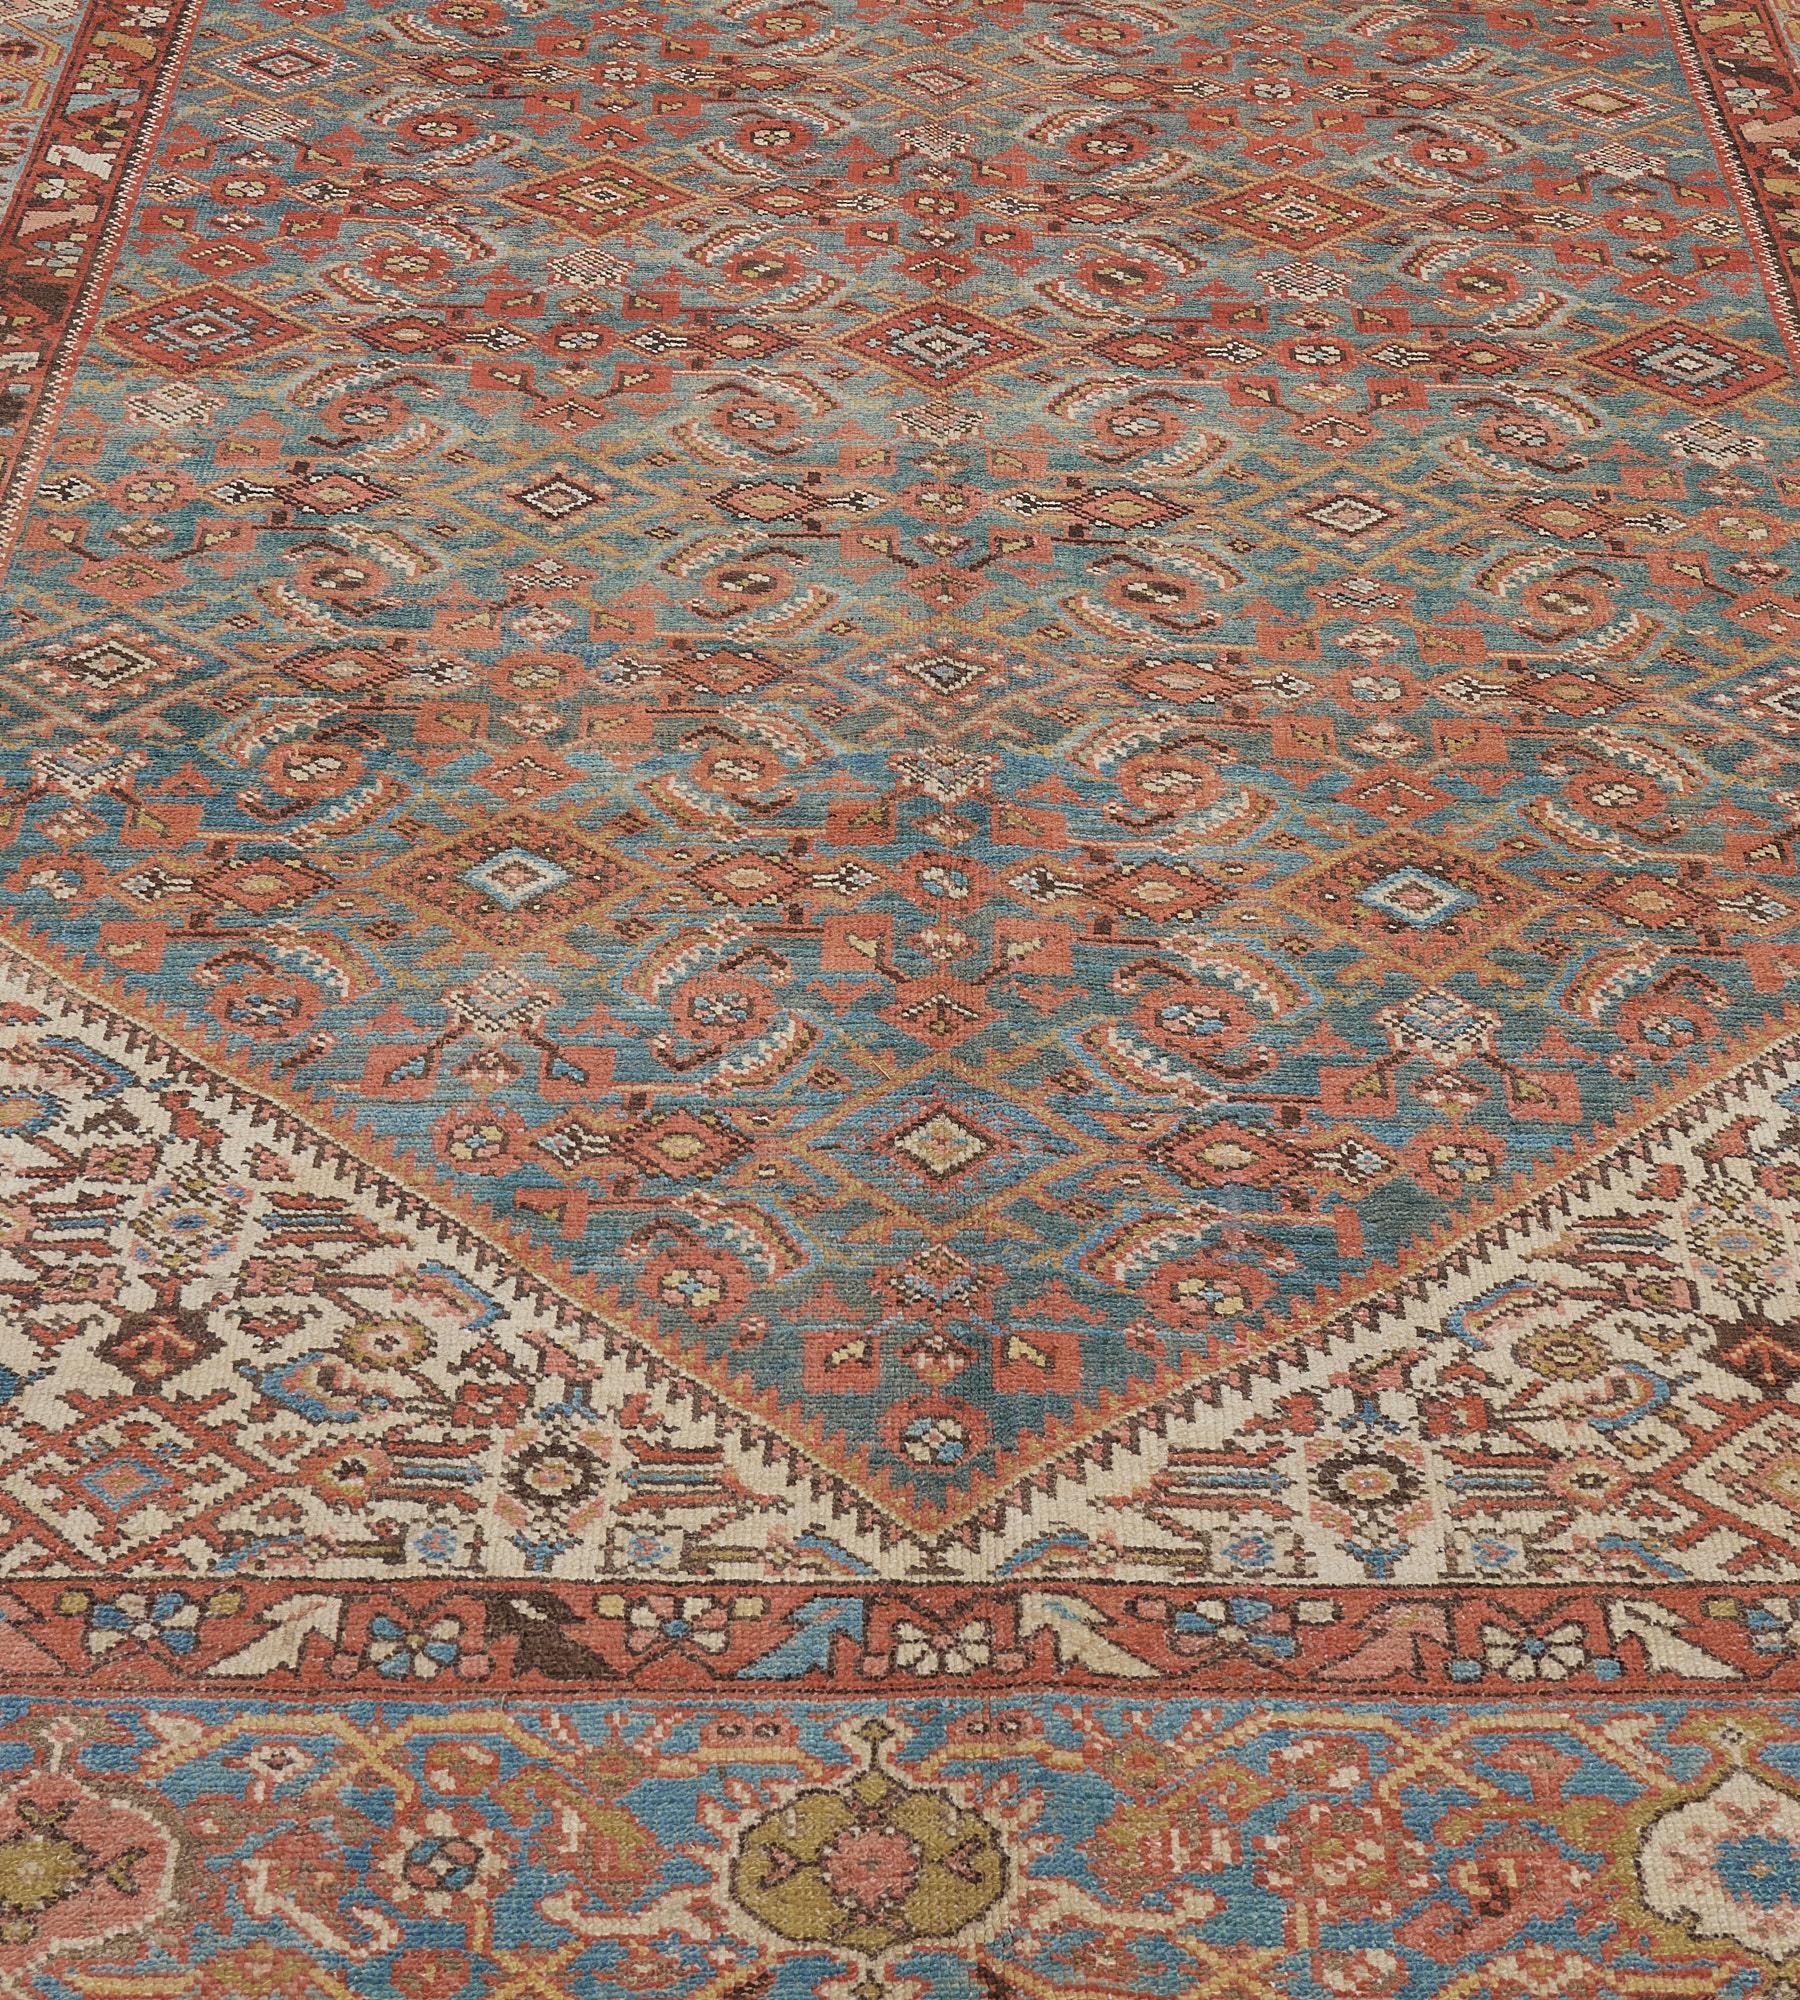 This antique, circa 1900, Persian Malayer runner has a light blue field with an overall brick-red and ivory herati-pattern, the ivory spandrels similar, in a light-blue field of polychrome turtle-palmette vine between brick-red floral vine stripes.